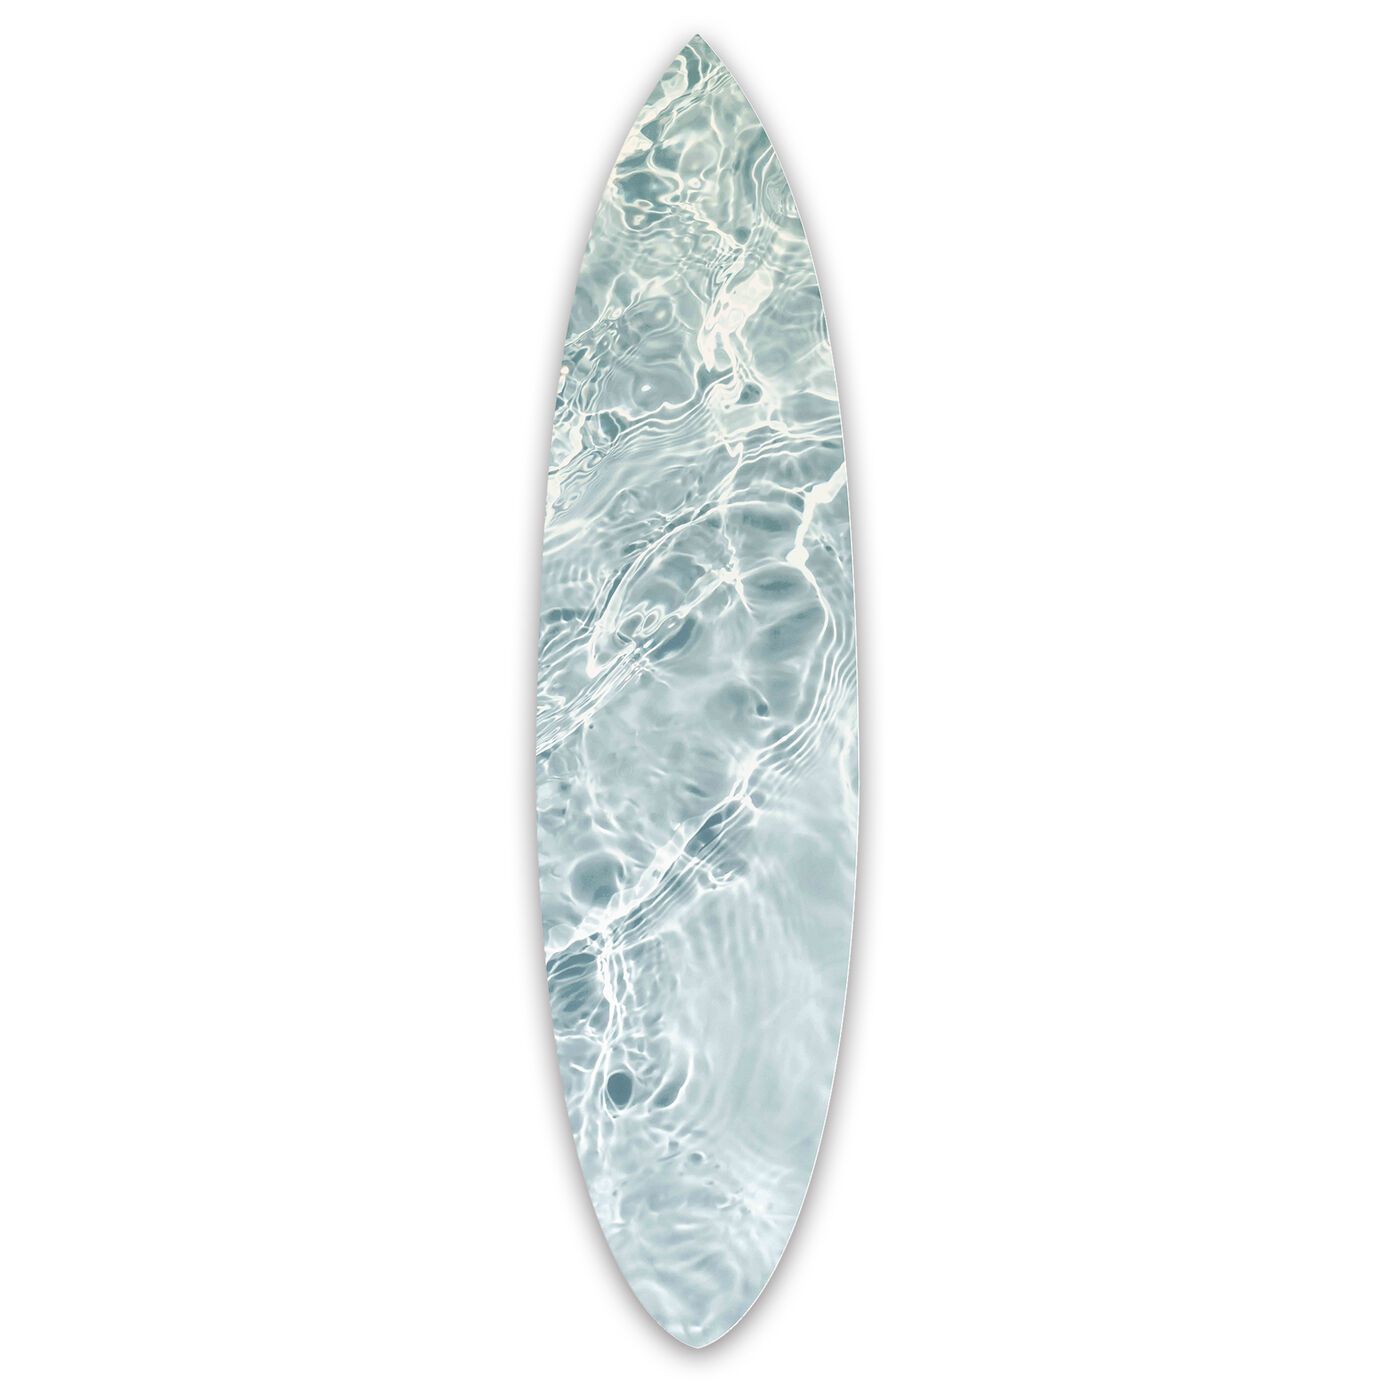 Calming Waves Clear Surfboard | Wall Art by Oliver Gal | Oliver Gal